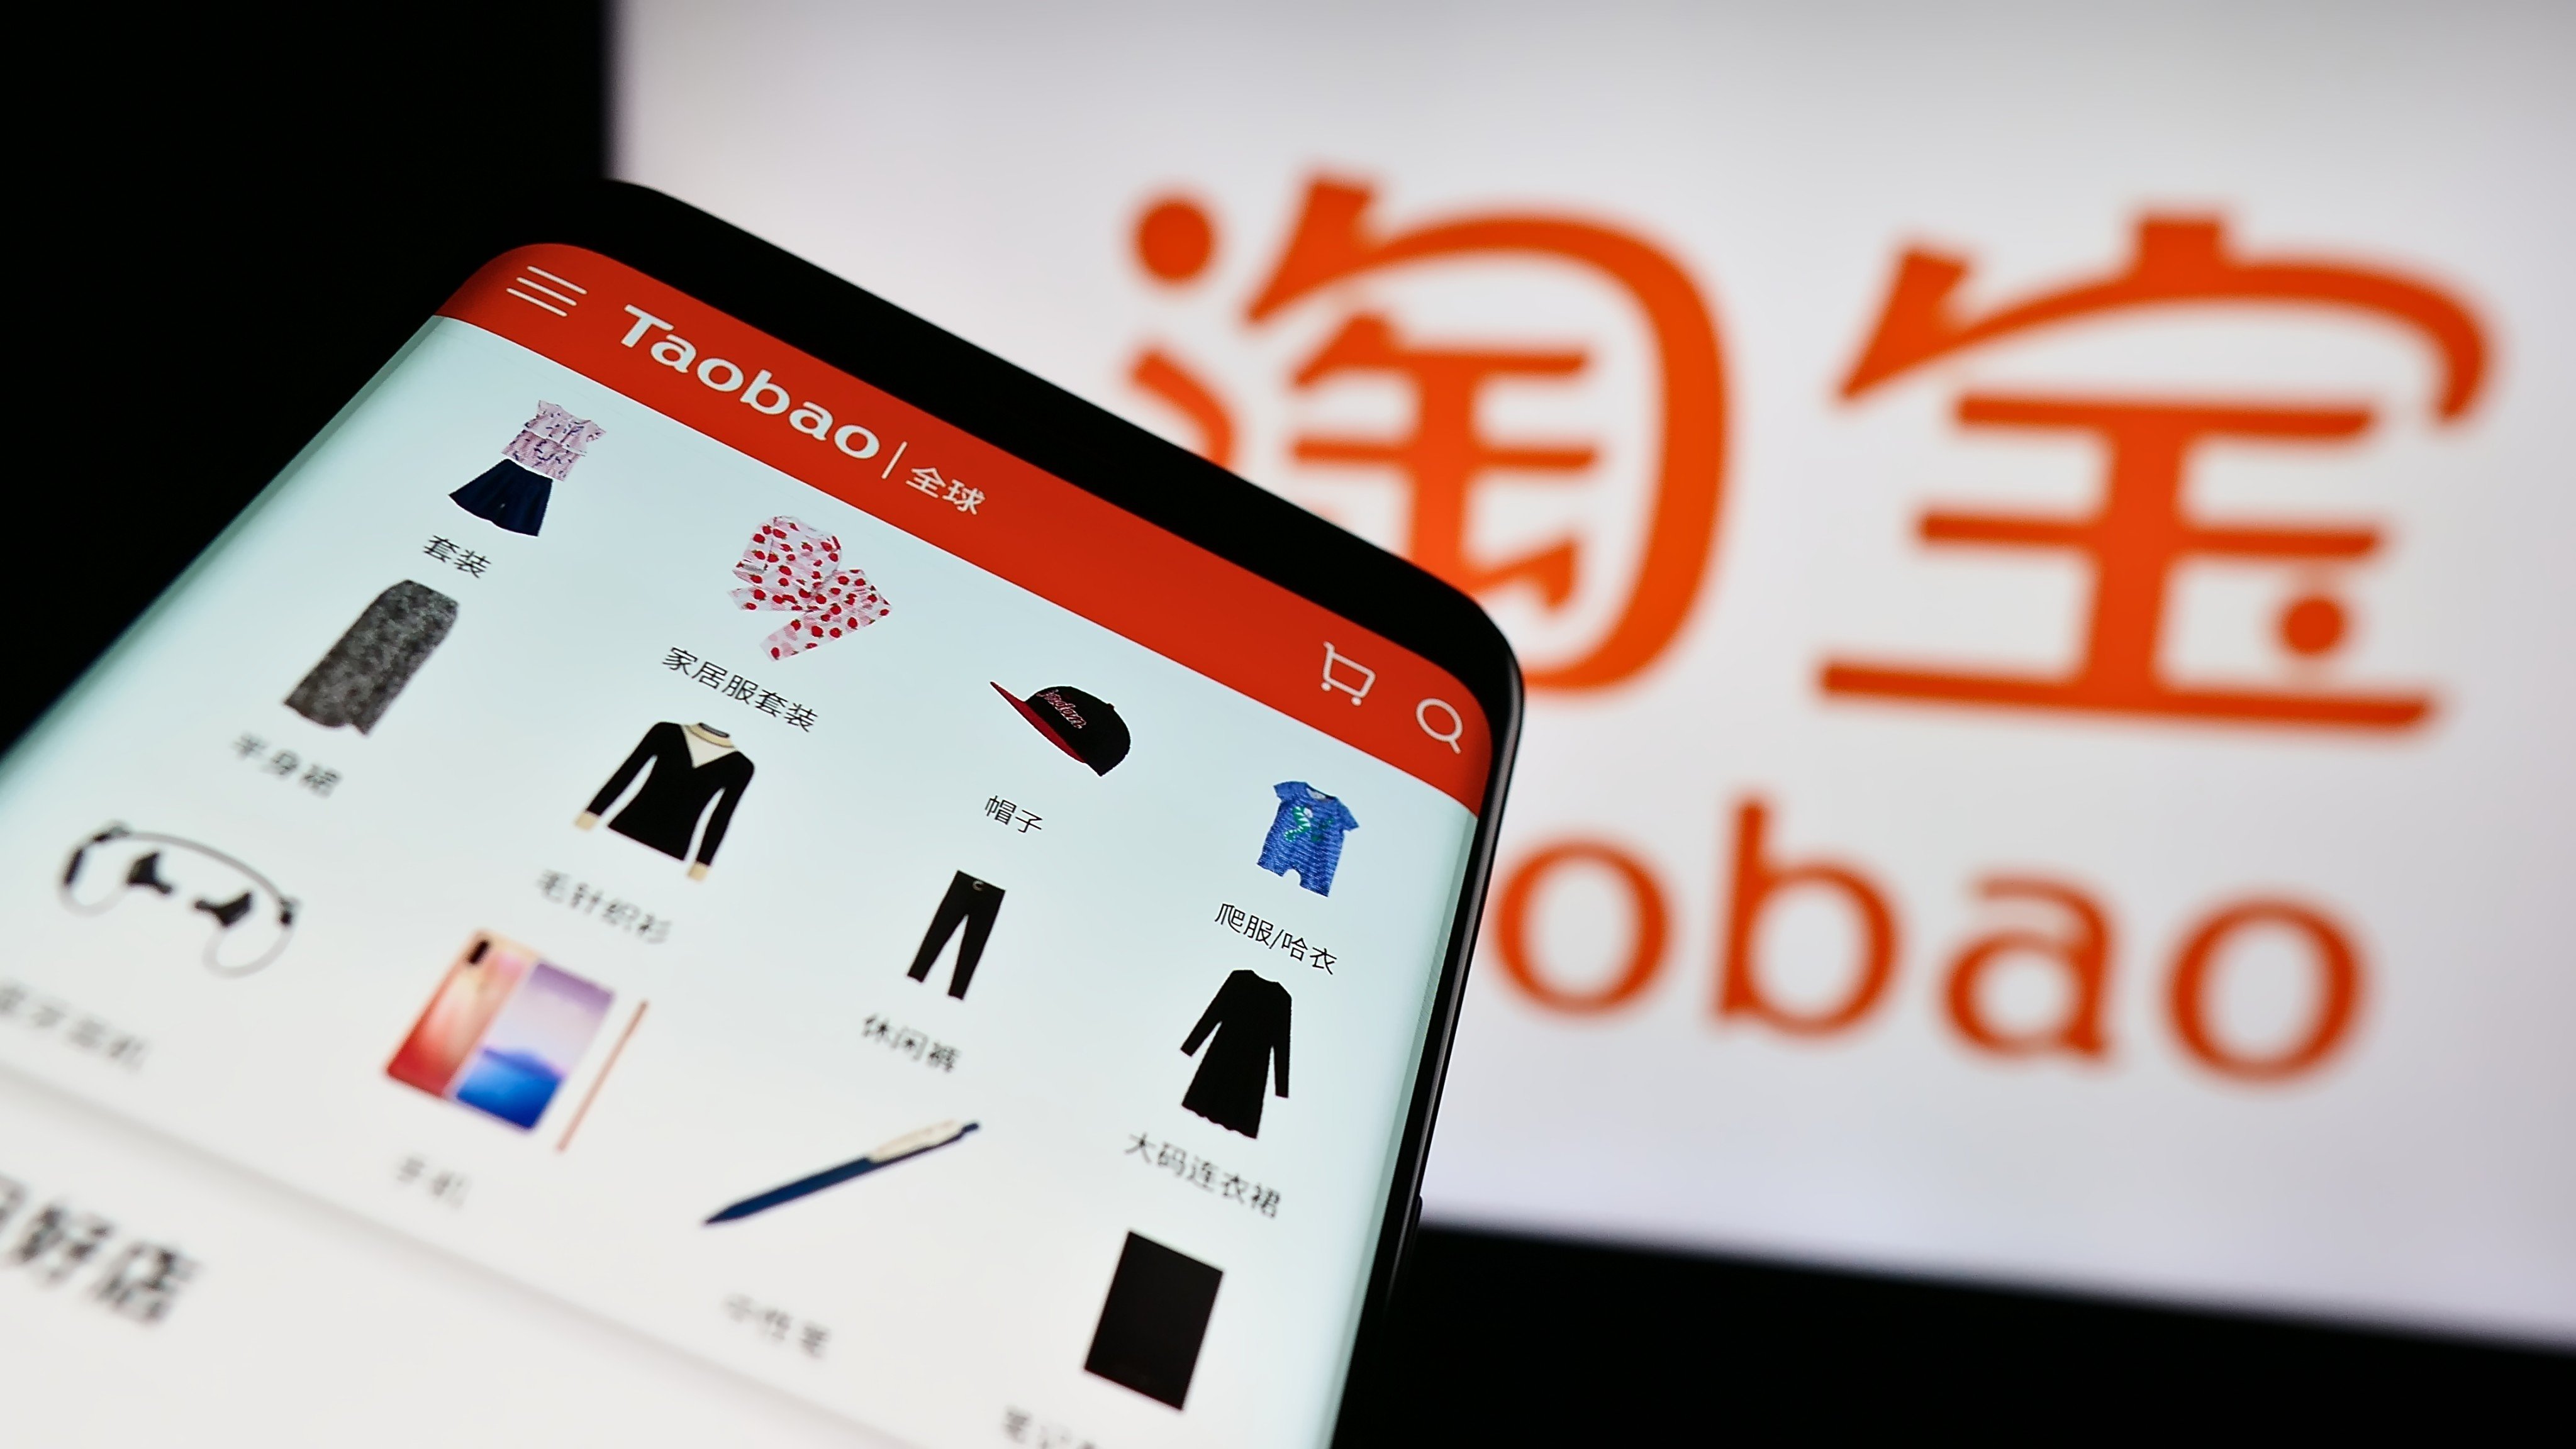 Taobao is expanding its product offerings available for one-hour delivery and adding a hotkey to its homepage to further entice users. Photo: Shutterstock